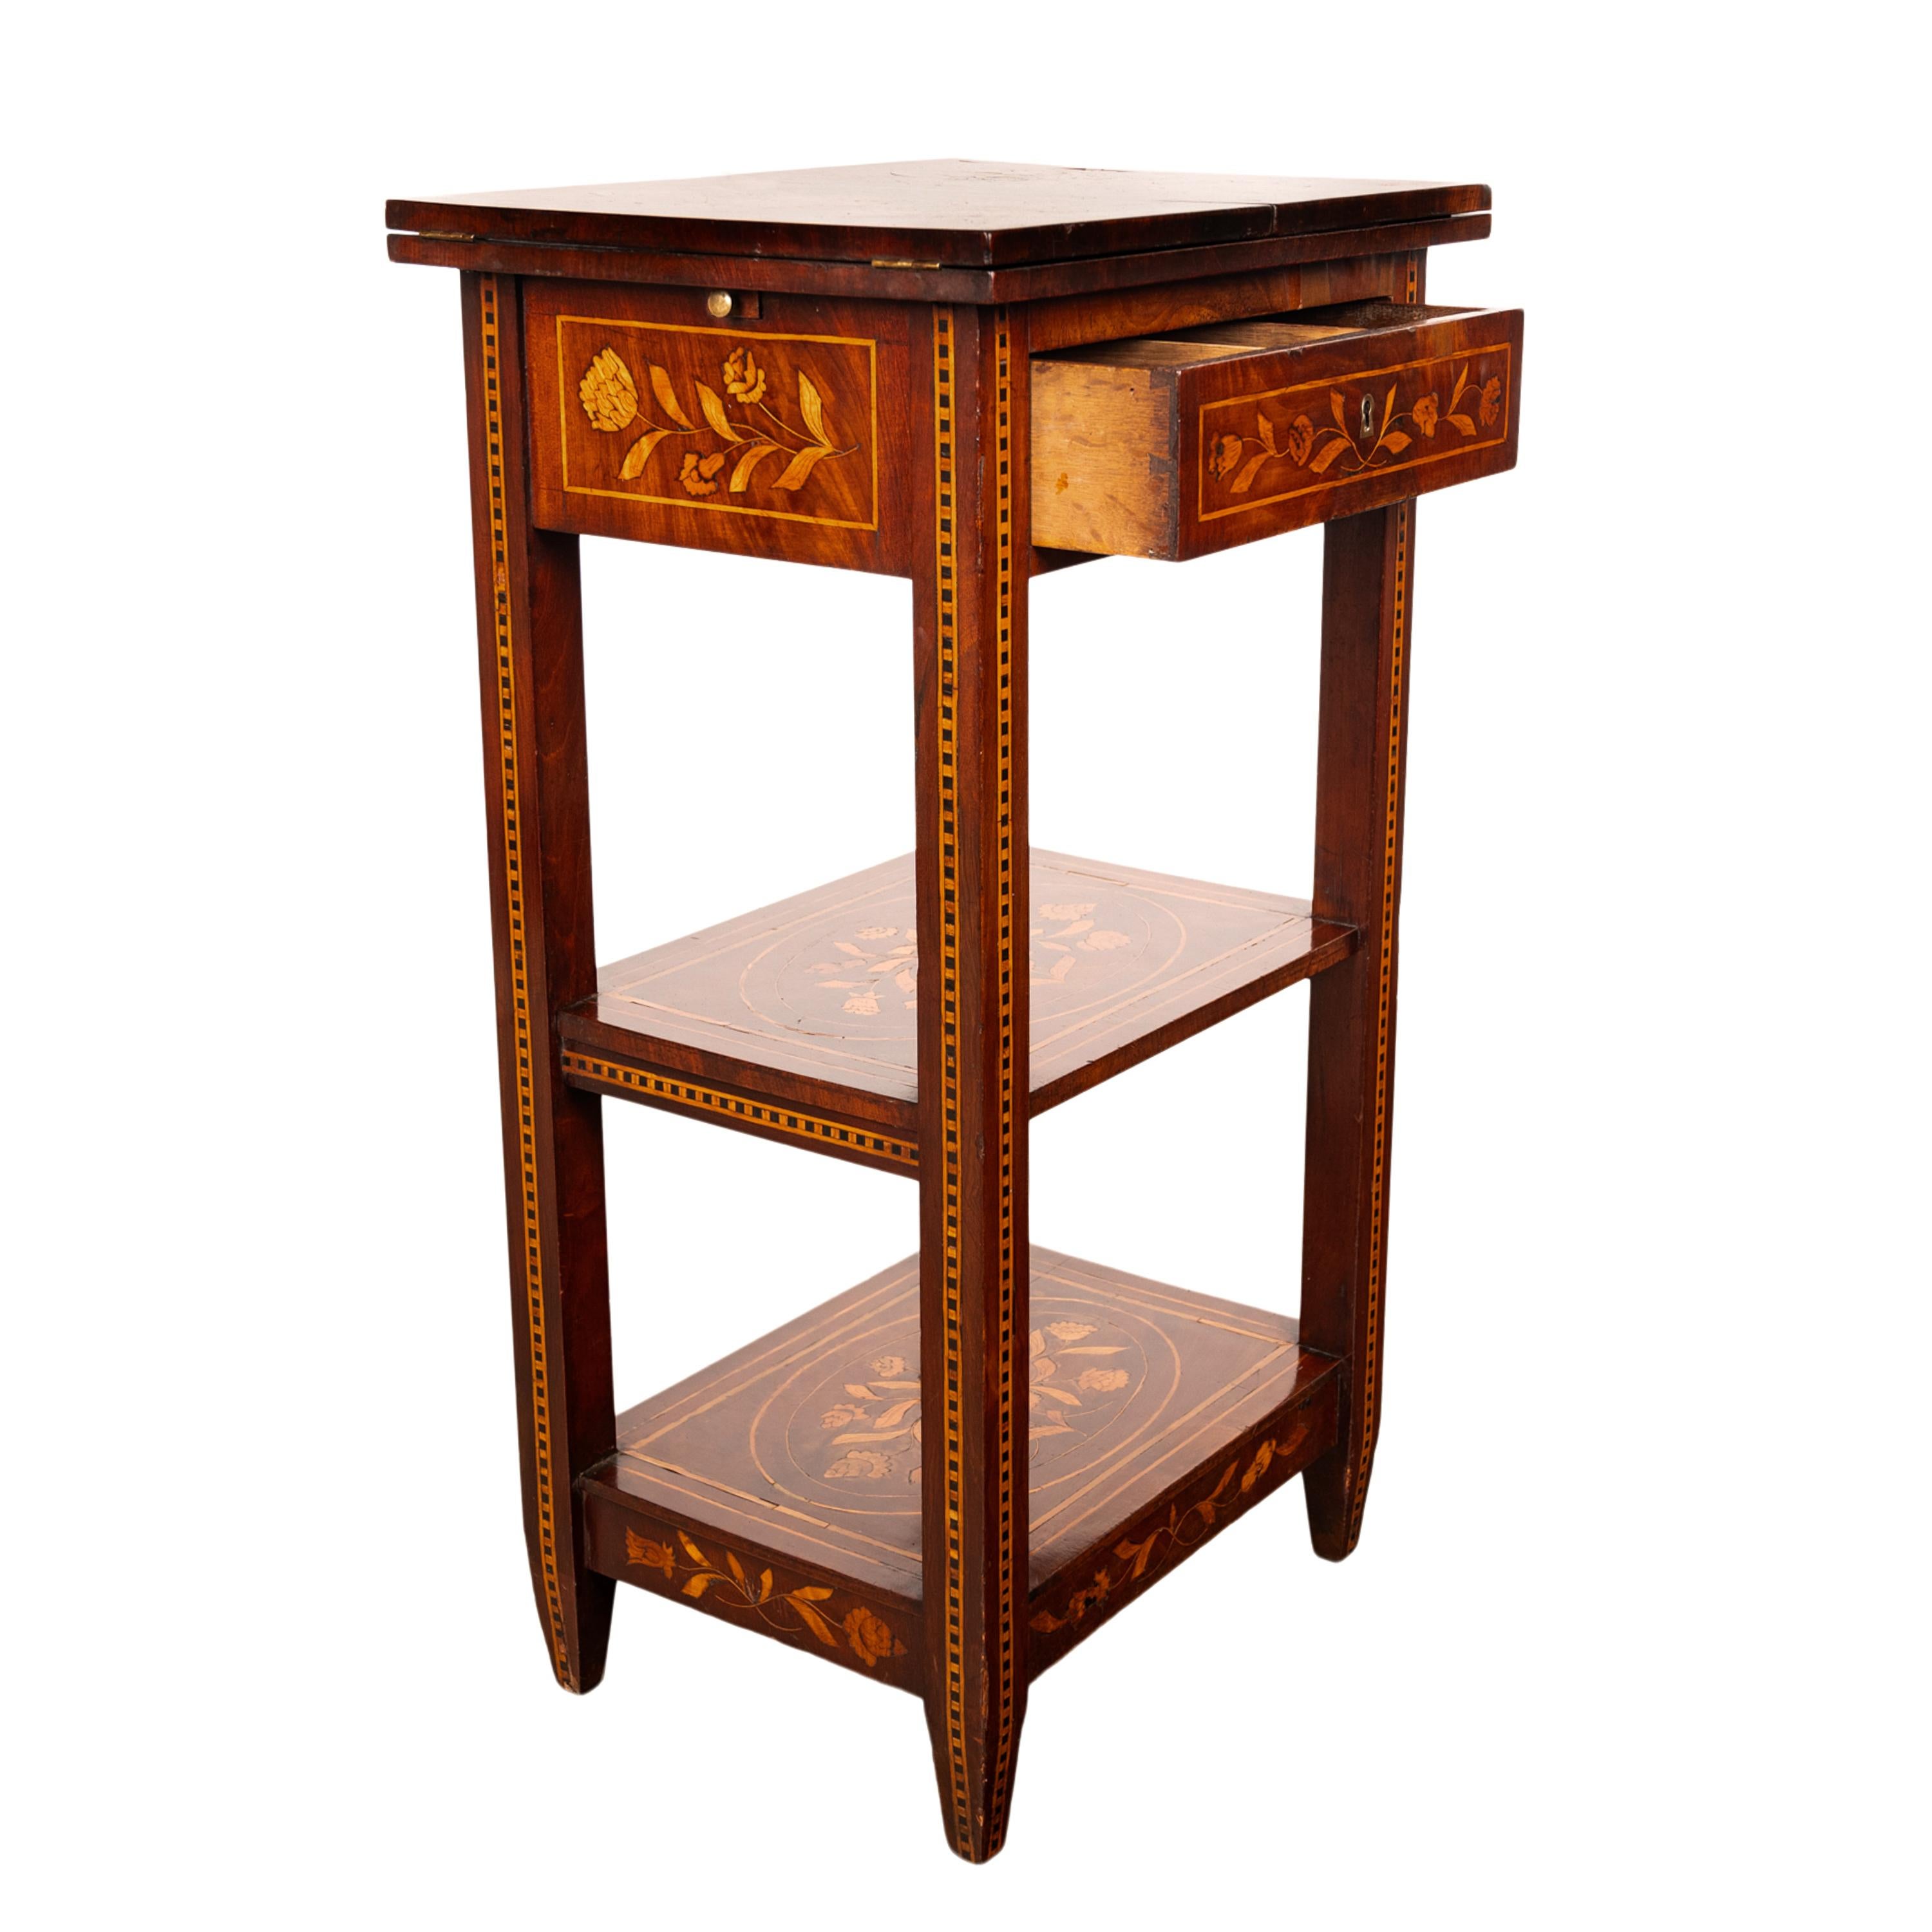 Ebony Antique Dutch Georgian Marquetry Foldout Rosewood Satinwood Table Etagere 1820 For Sale